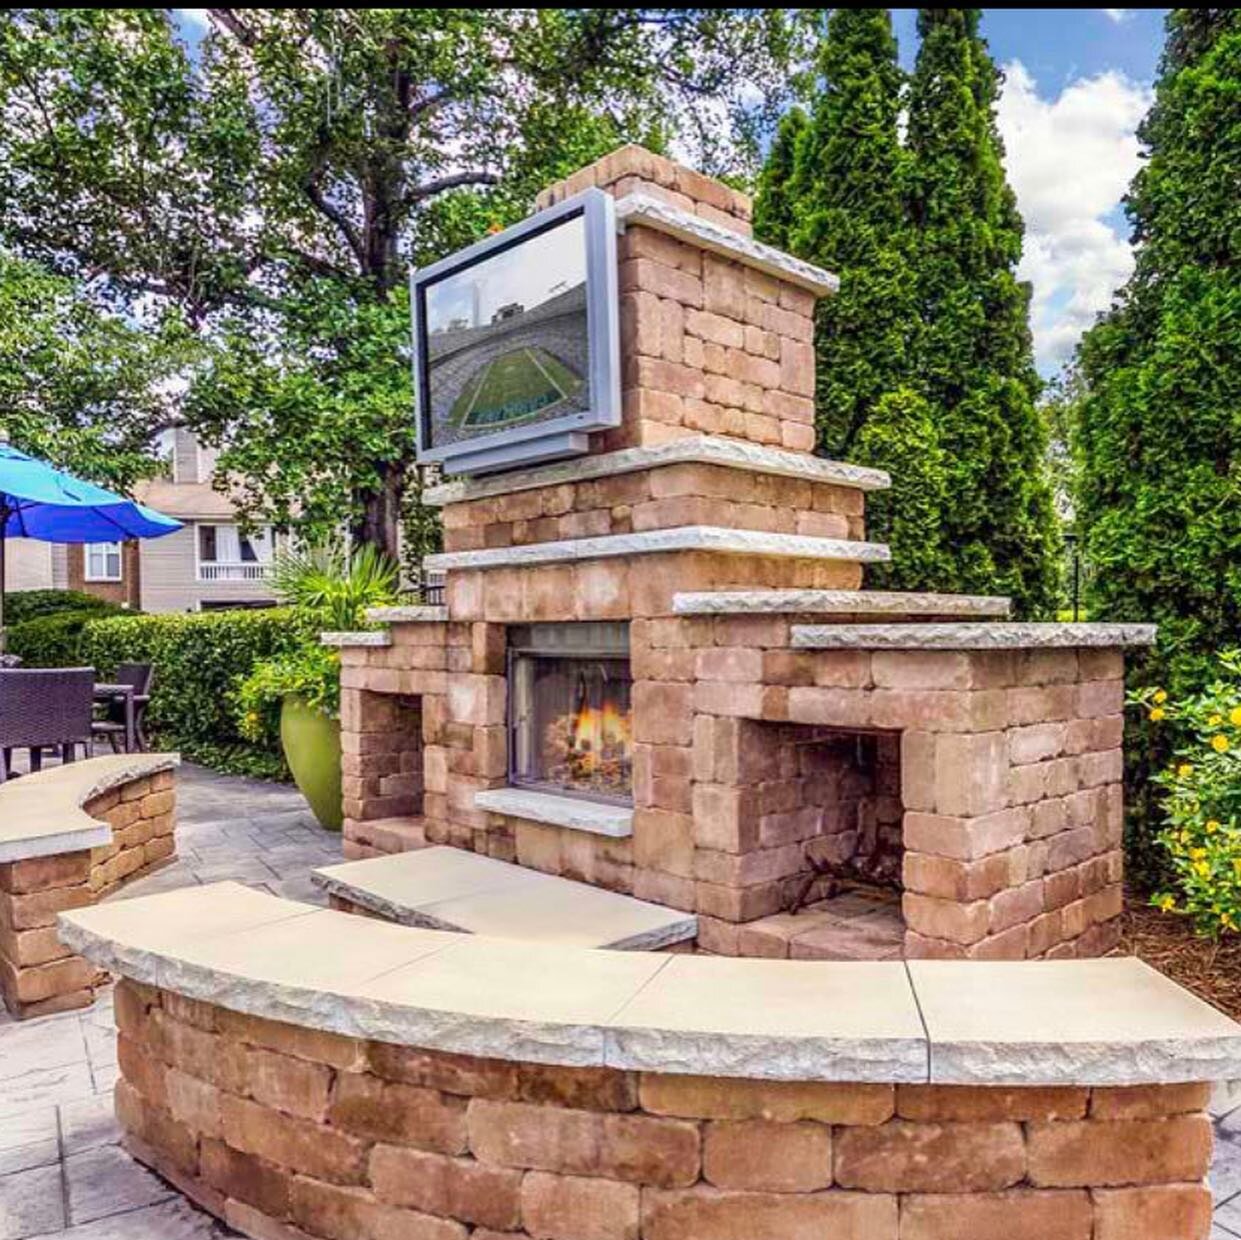 This is a fireplace and stamped concrete project we completed about 6 years ago at Camden Fairview apartments in Charlotte, NC.  #terrascapesnc #retainingwalls #retainingwalldesign #unitpaving #landscapeconstruction #contractorsofinsta #landscape #be